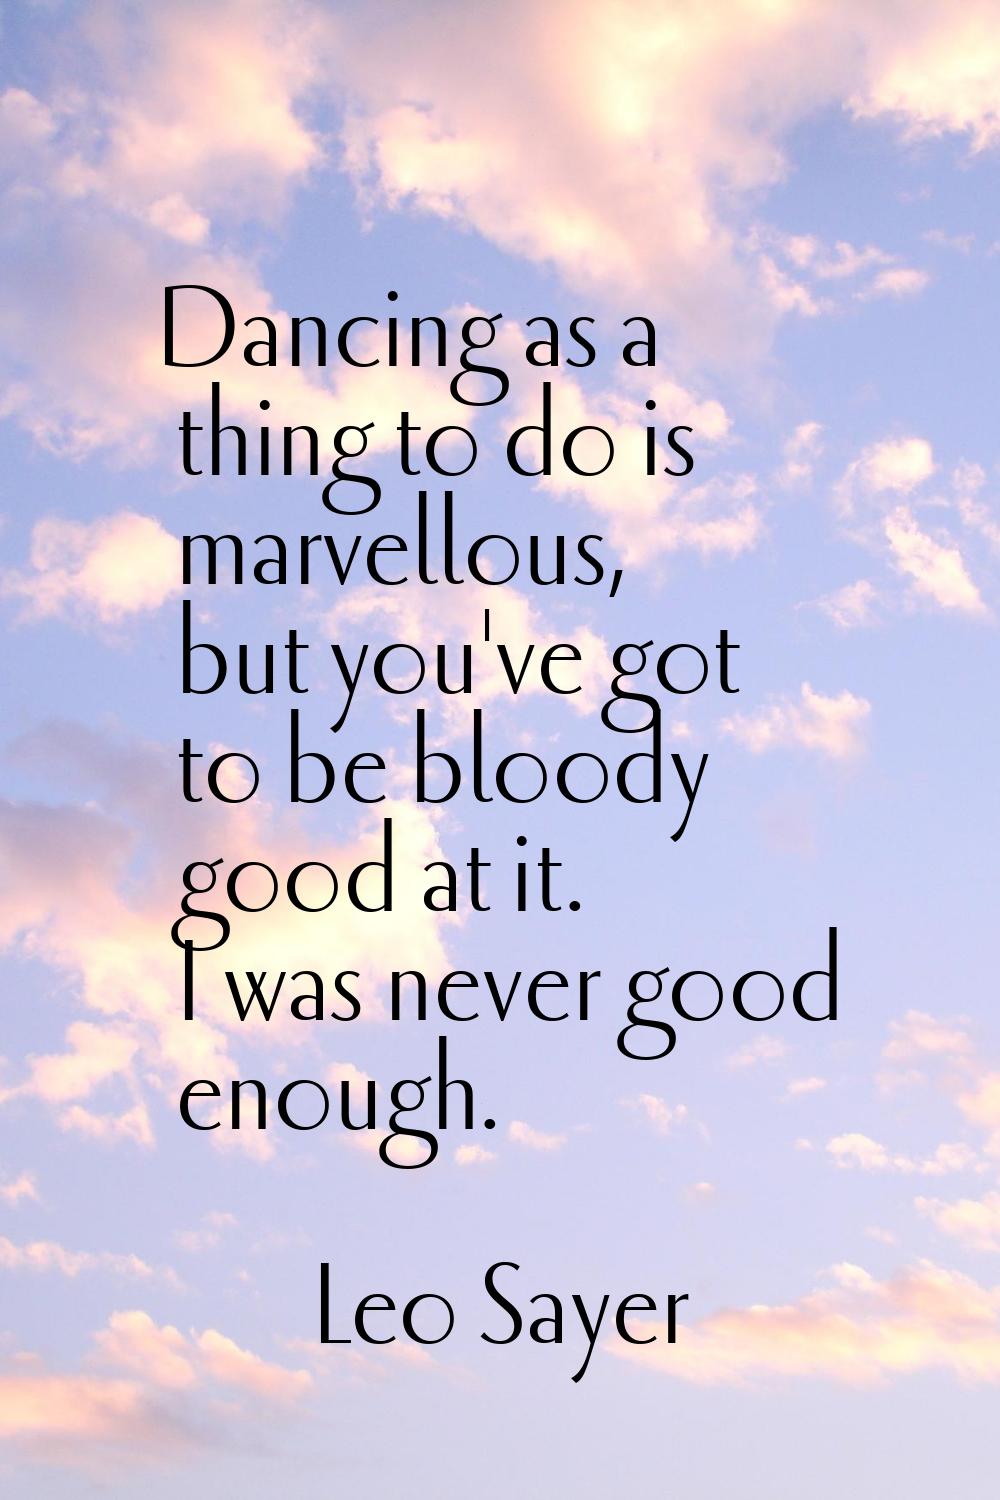 Dancing as a thing to do is marvellous, but you've got to be bloody good at it. I was never good en